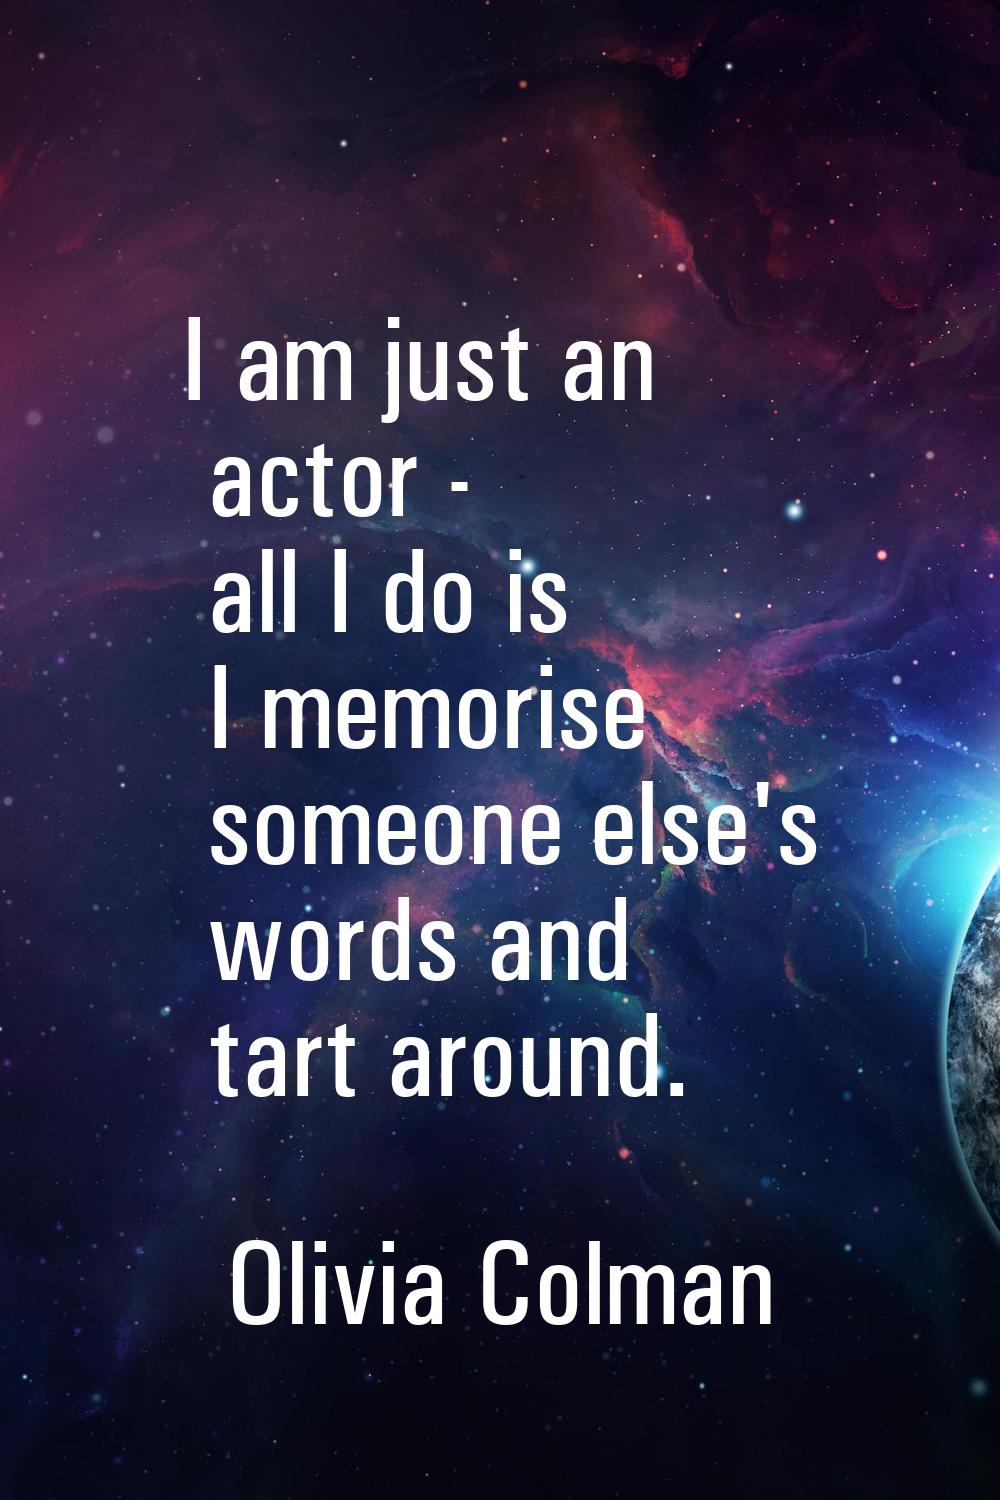 I am just an actor - all I do is I memorise someone else's words and tart around.